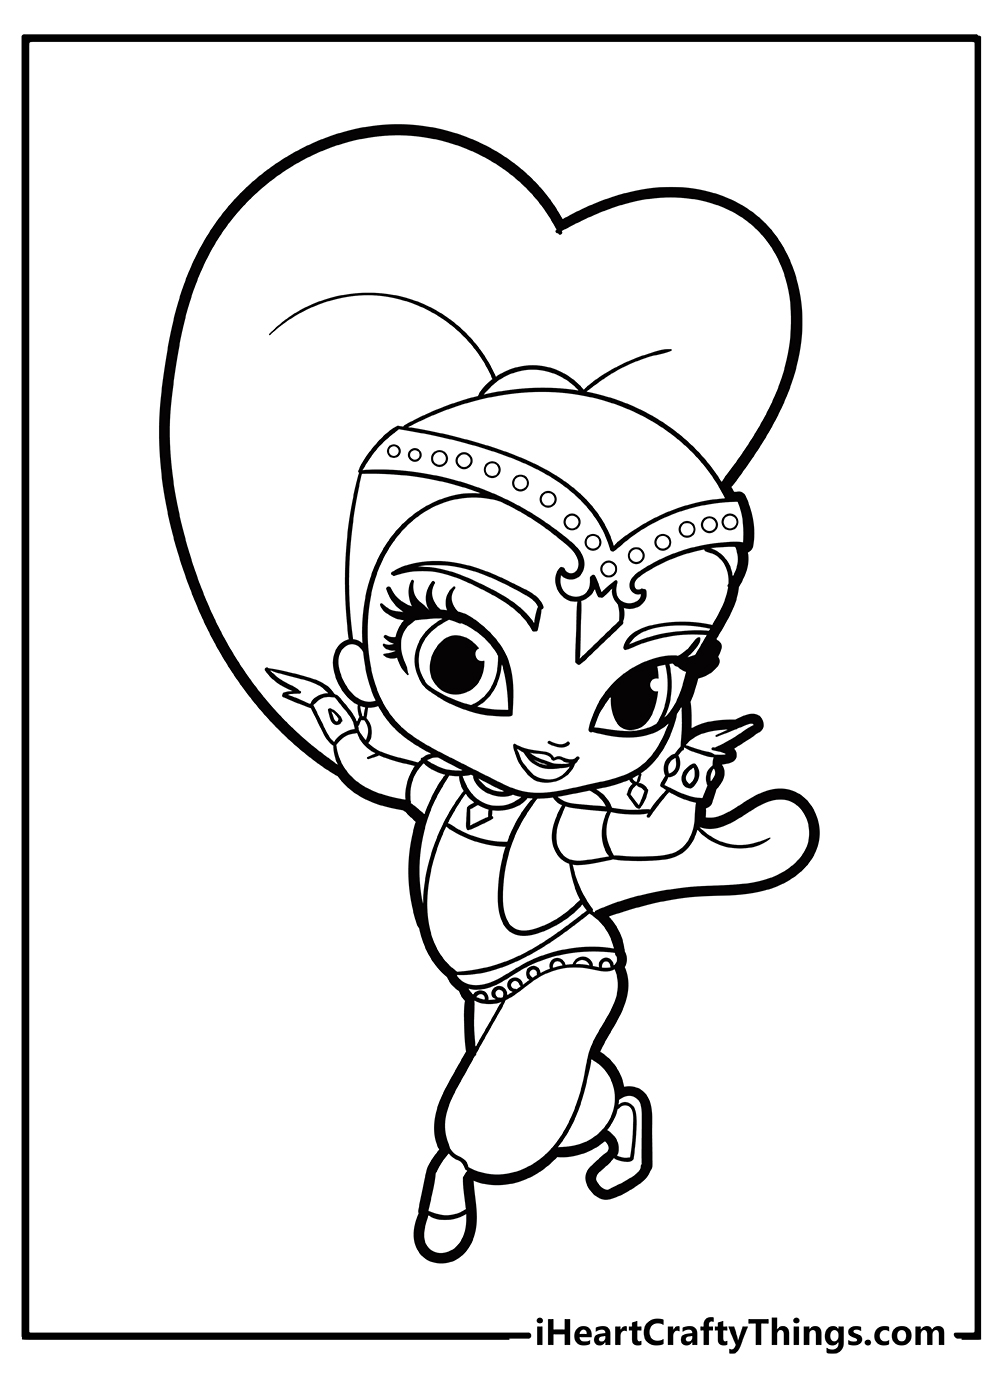 Shimmer and Shine Coloring Pages for kids free download